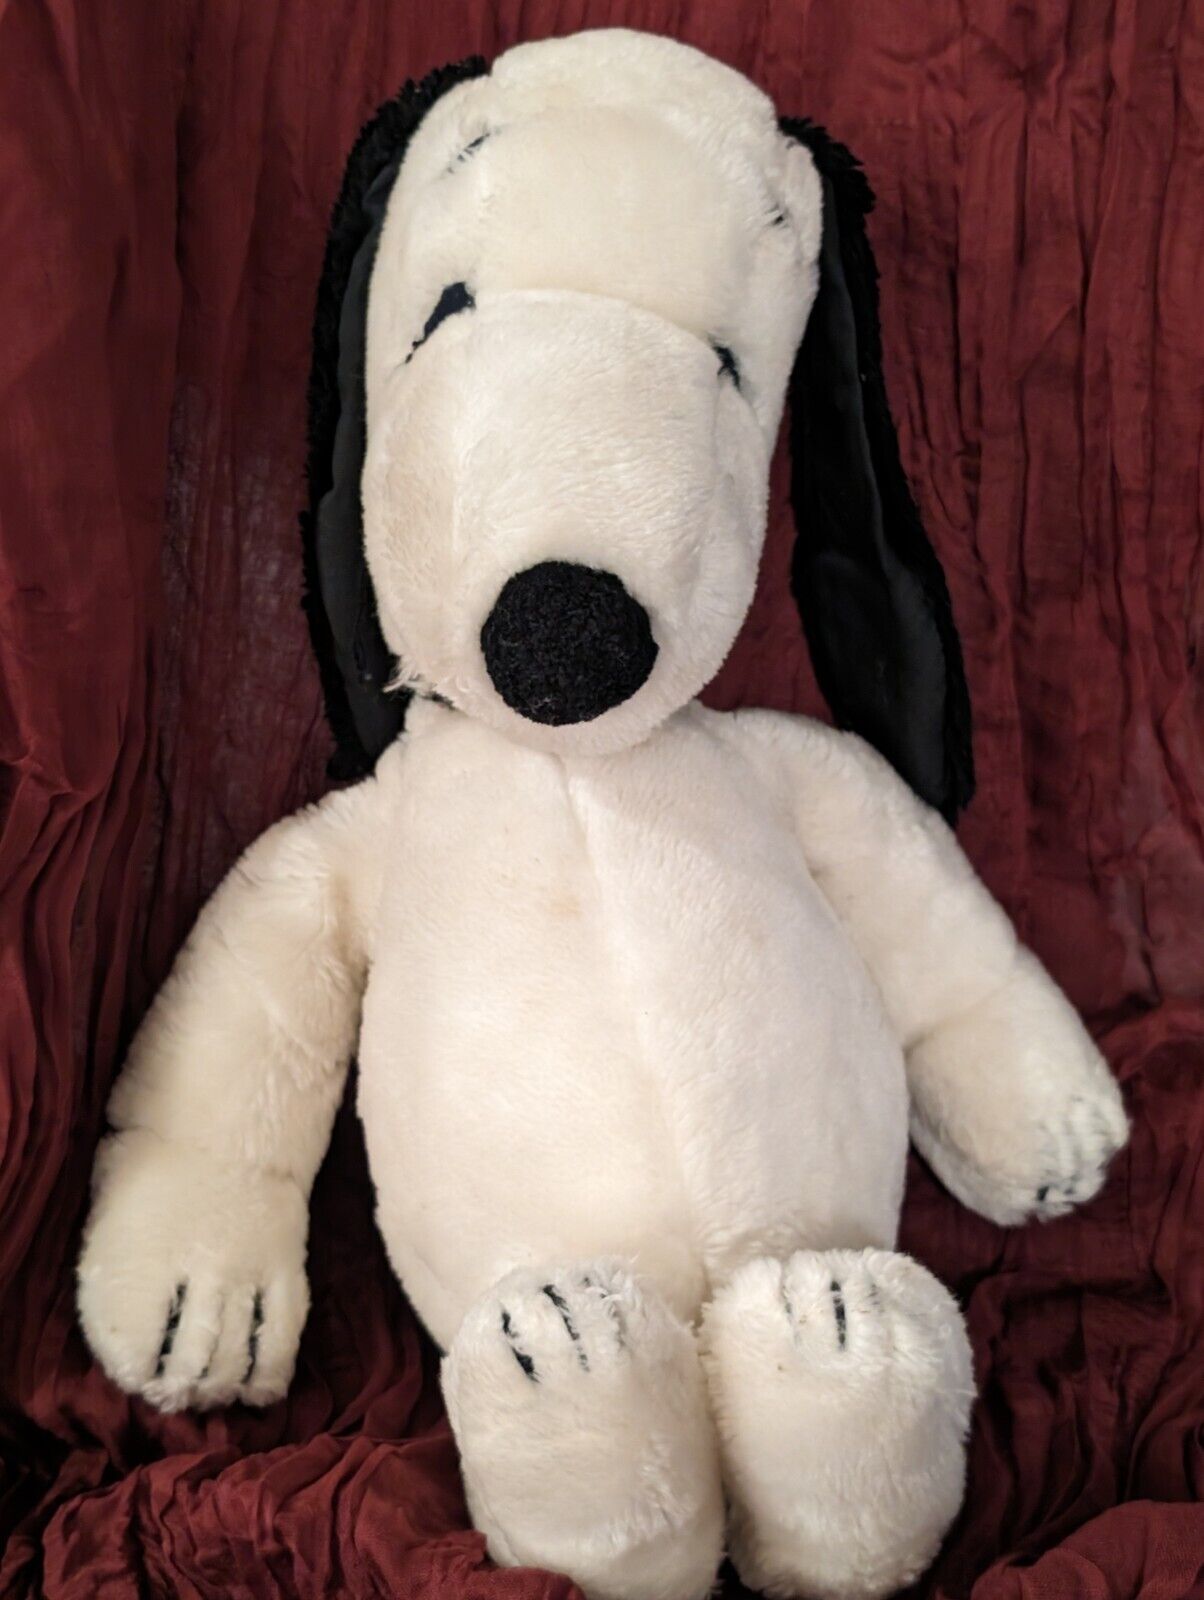 1968 SNOOPY Plush Stuffed Animal Toy Peanuts United Feature Synd. 12” Vintage